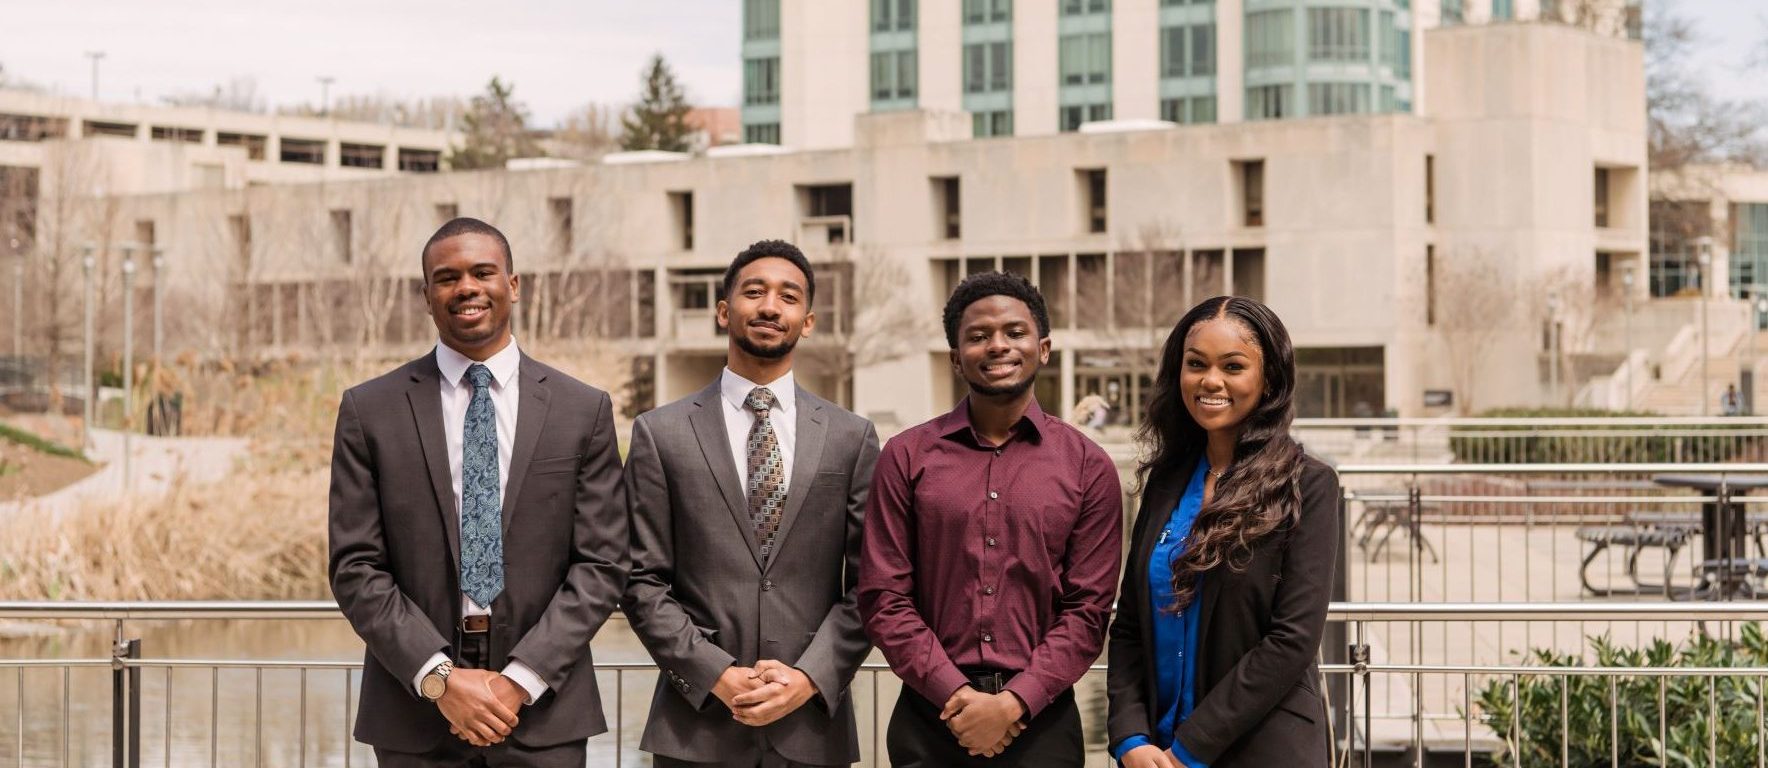 Four UMBC students receive Goldwater Scholarship for STEM research, tying prior record